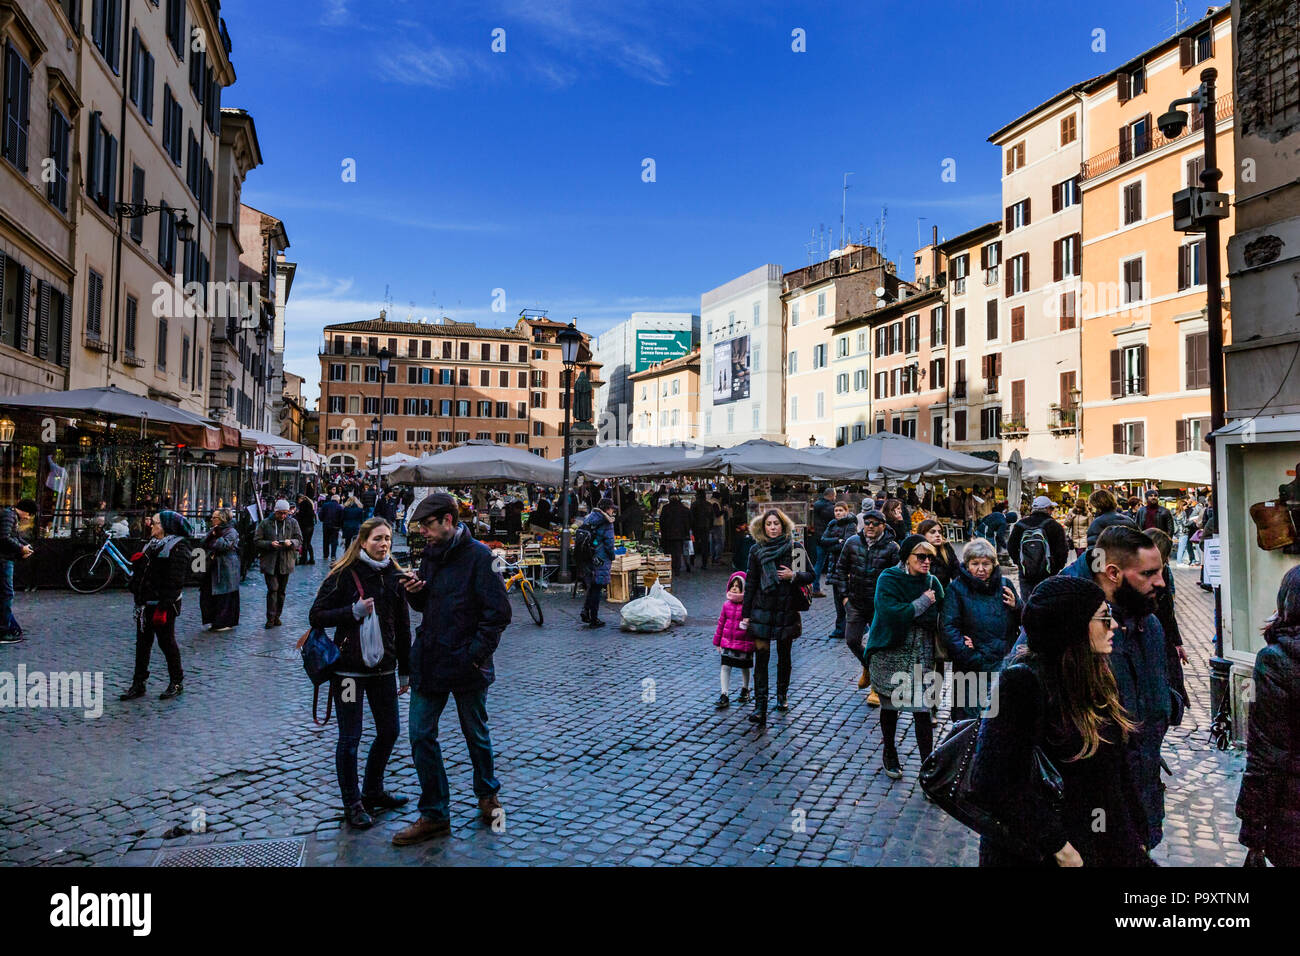 Campo de Fiori is a rectangular square south of Piazza Navona in Rome,  Italy, at the border between rione Parione and rione Regola. It is  diagonally southeast of the Palazzo della Cancelleria